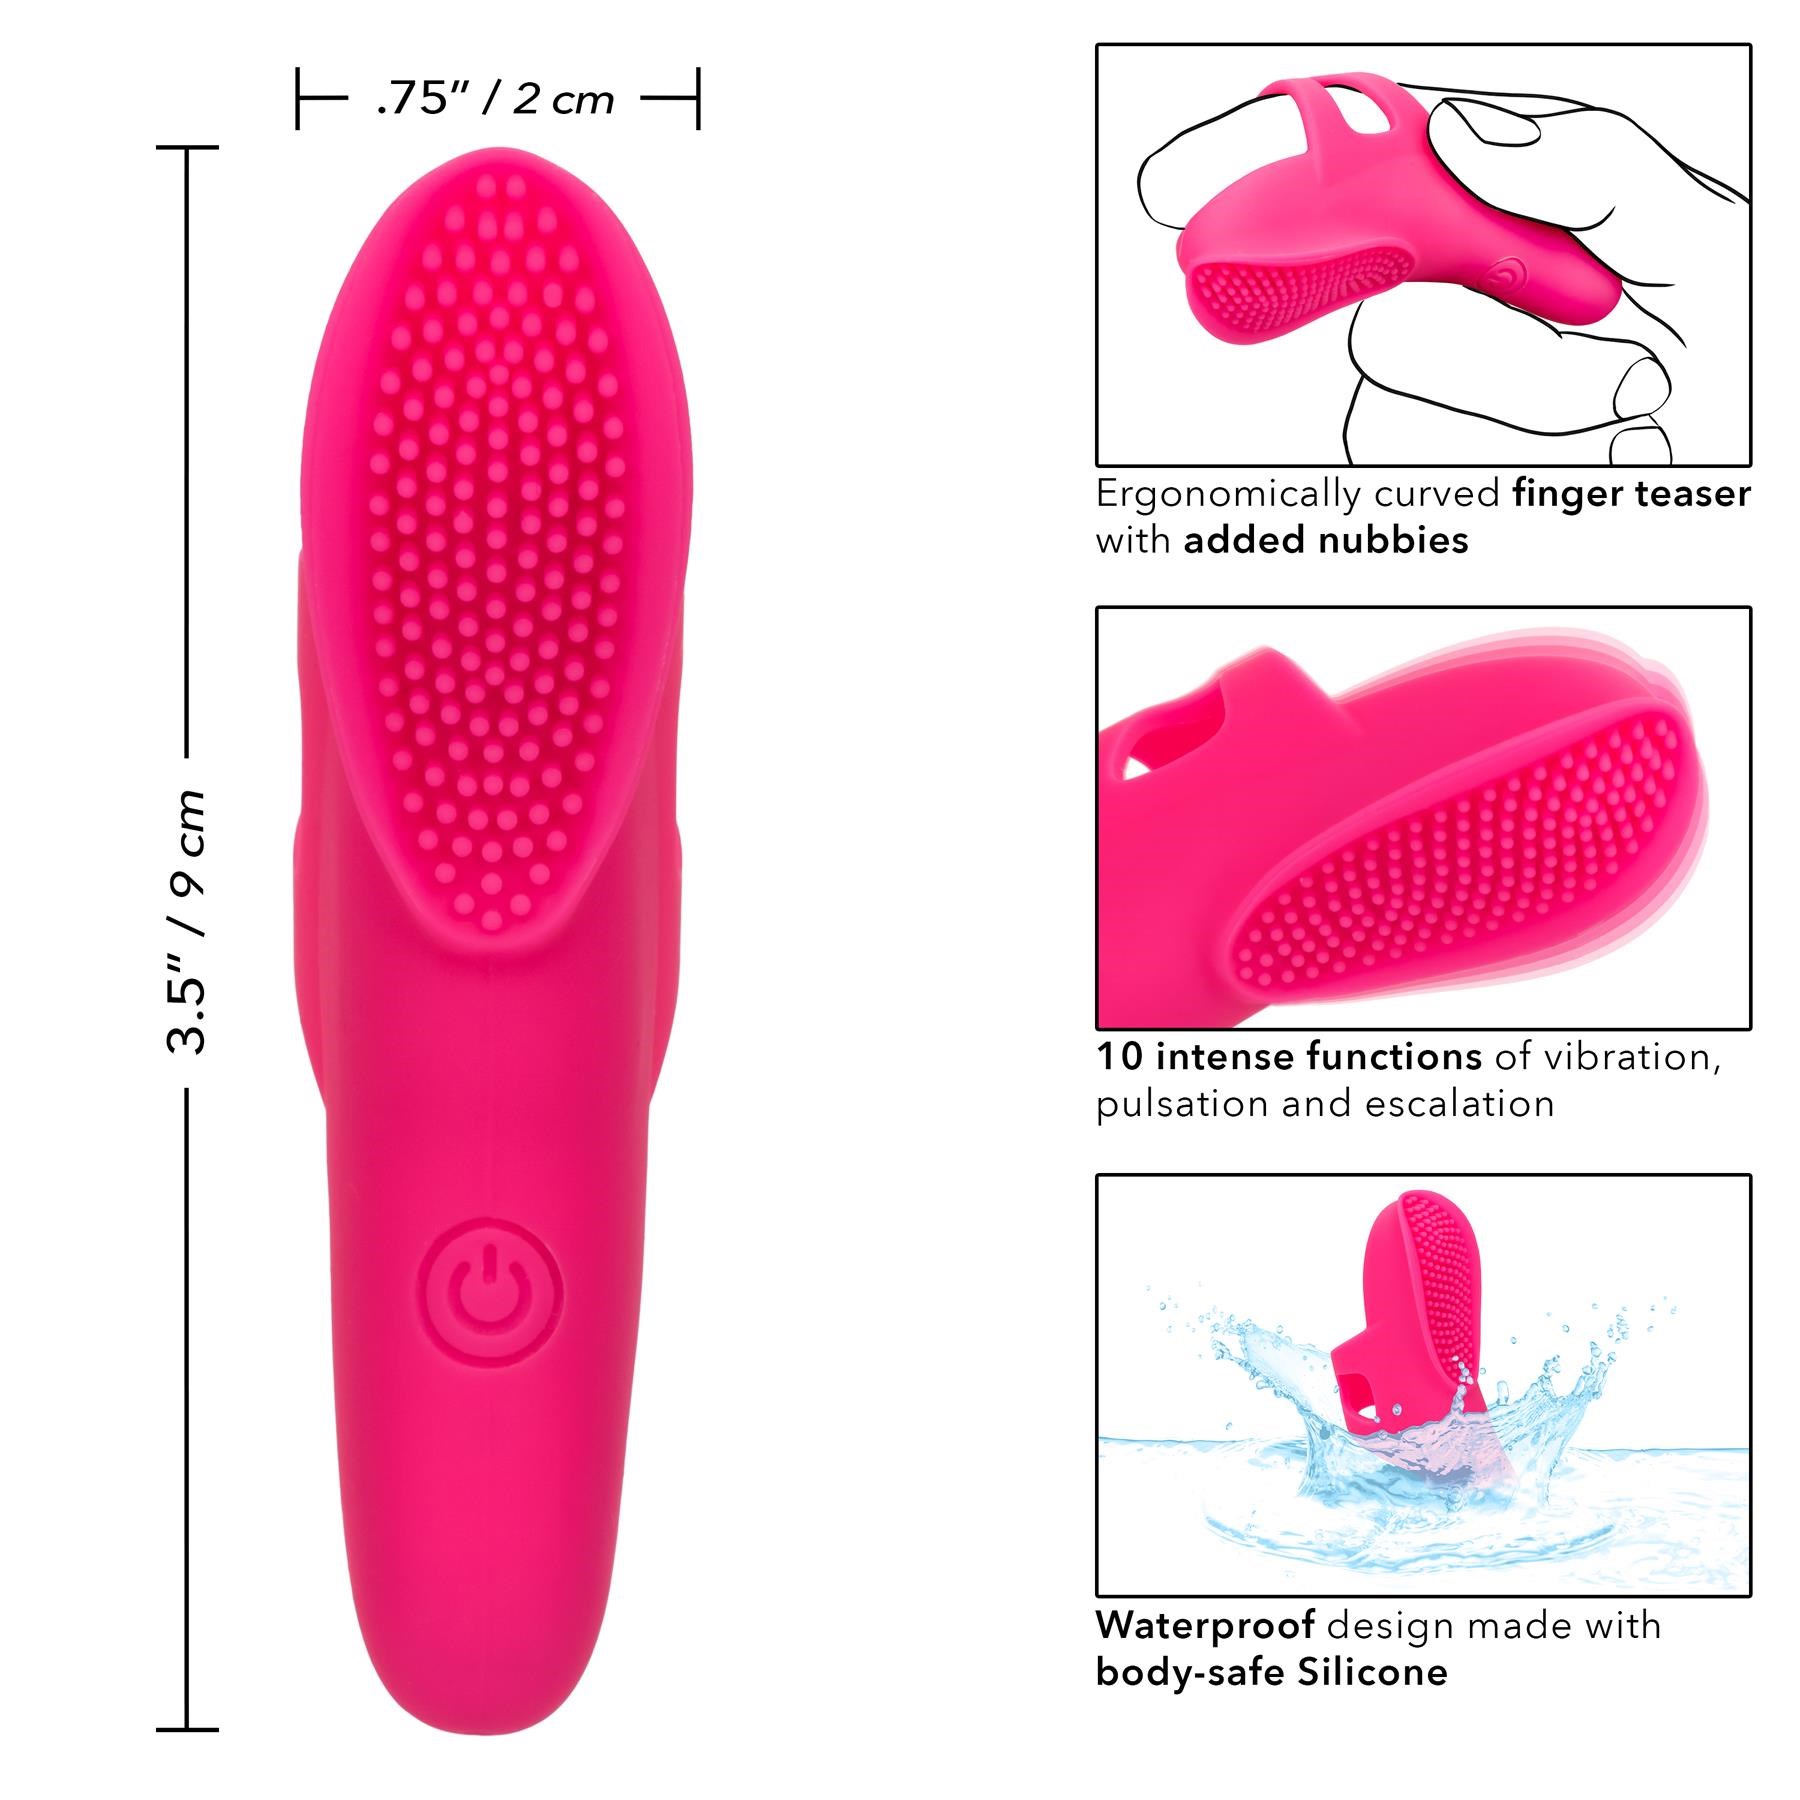 Neon Vibes The Nubby Finger Vibrator- Dimensions and Instructions